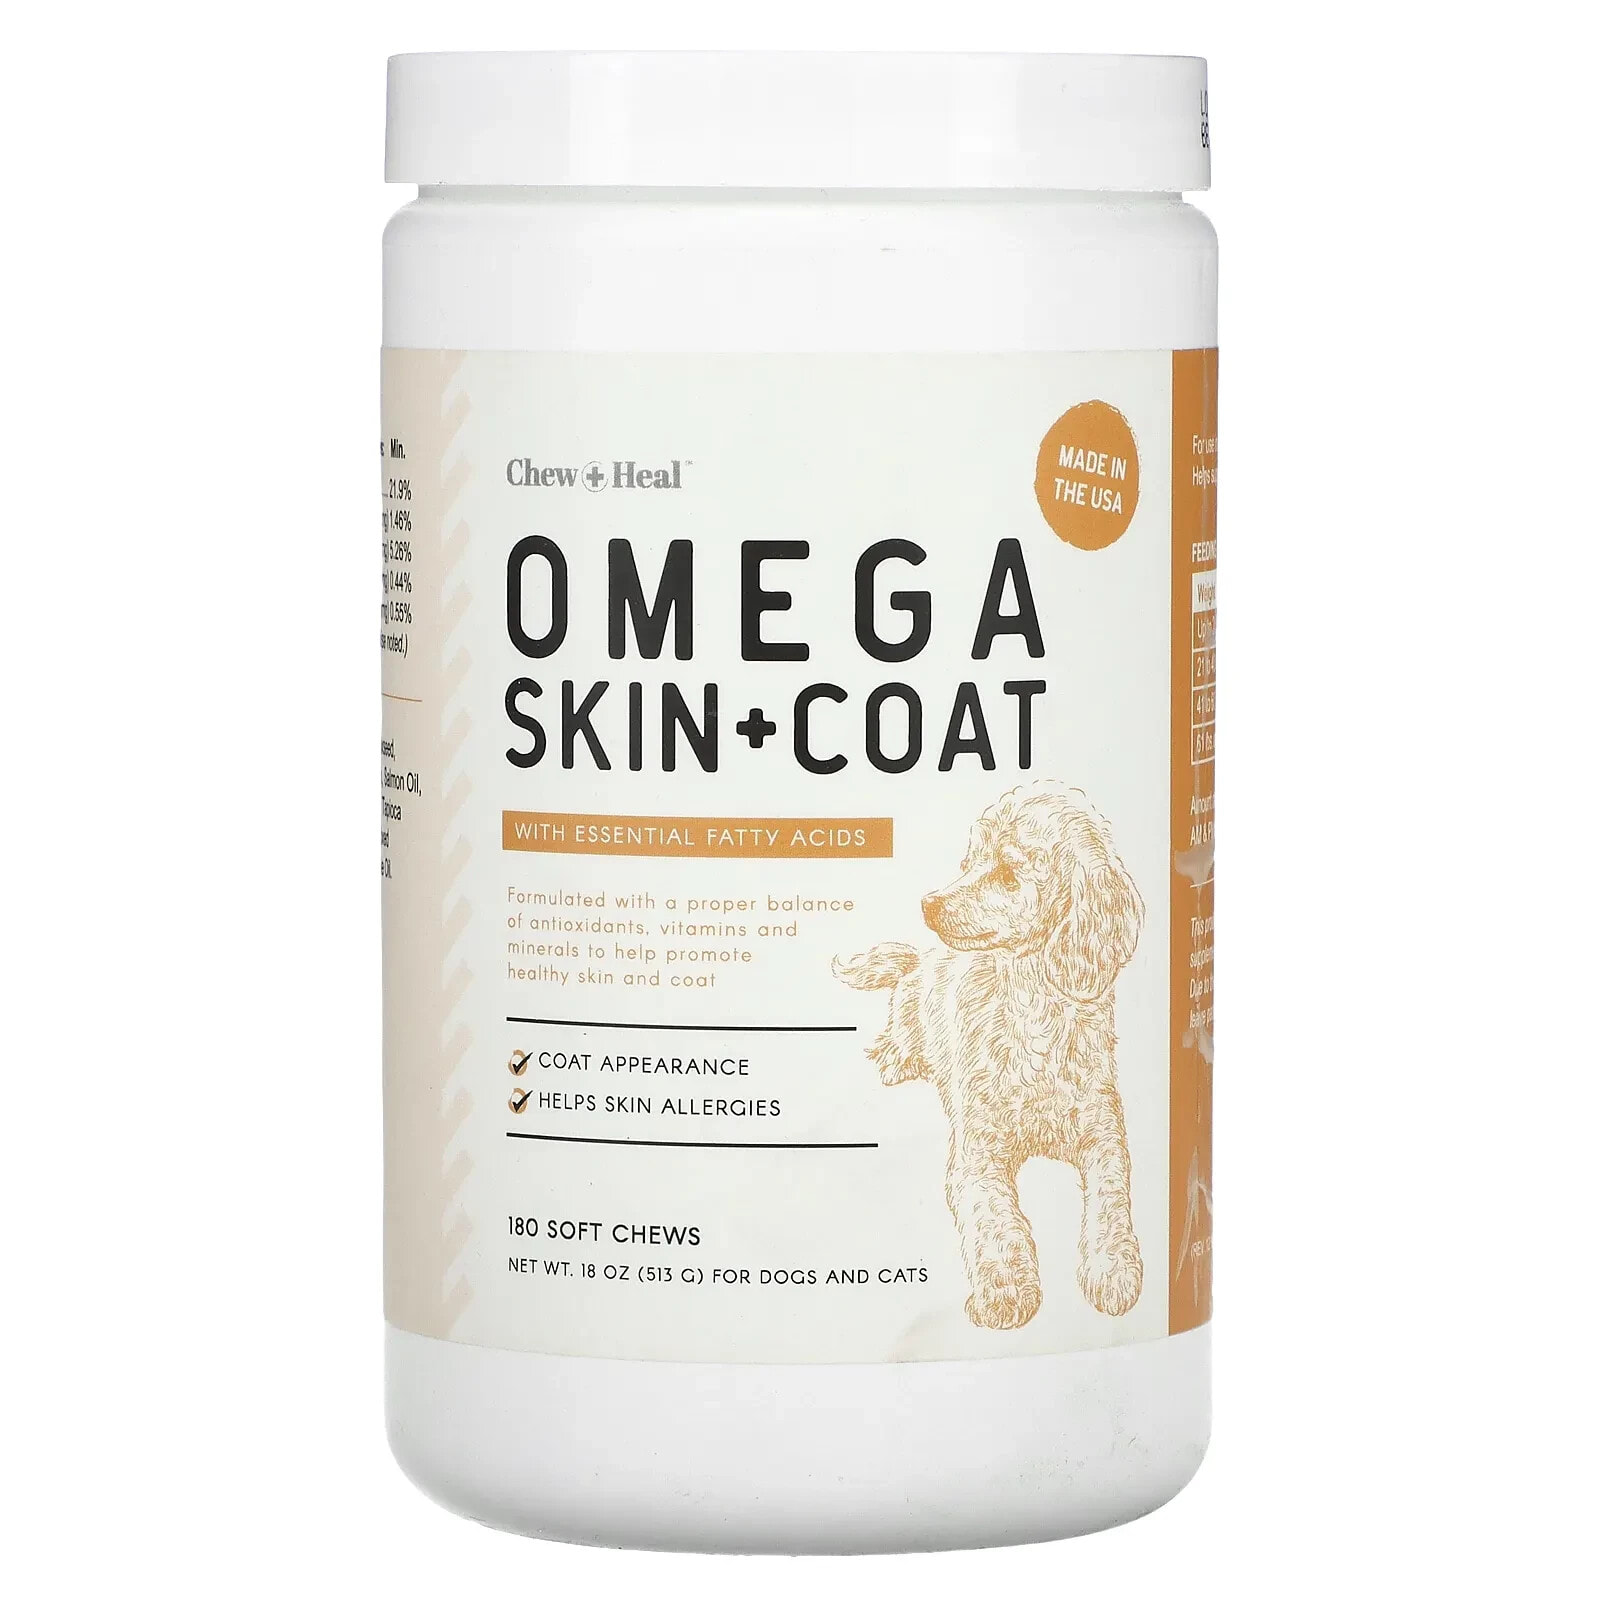 Chew + Heal, Omega Skin + Coat, with Essential Fatty Acids, For Dogs and Cats, 180 Soft Chew, 18 oz (513 g)